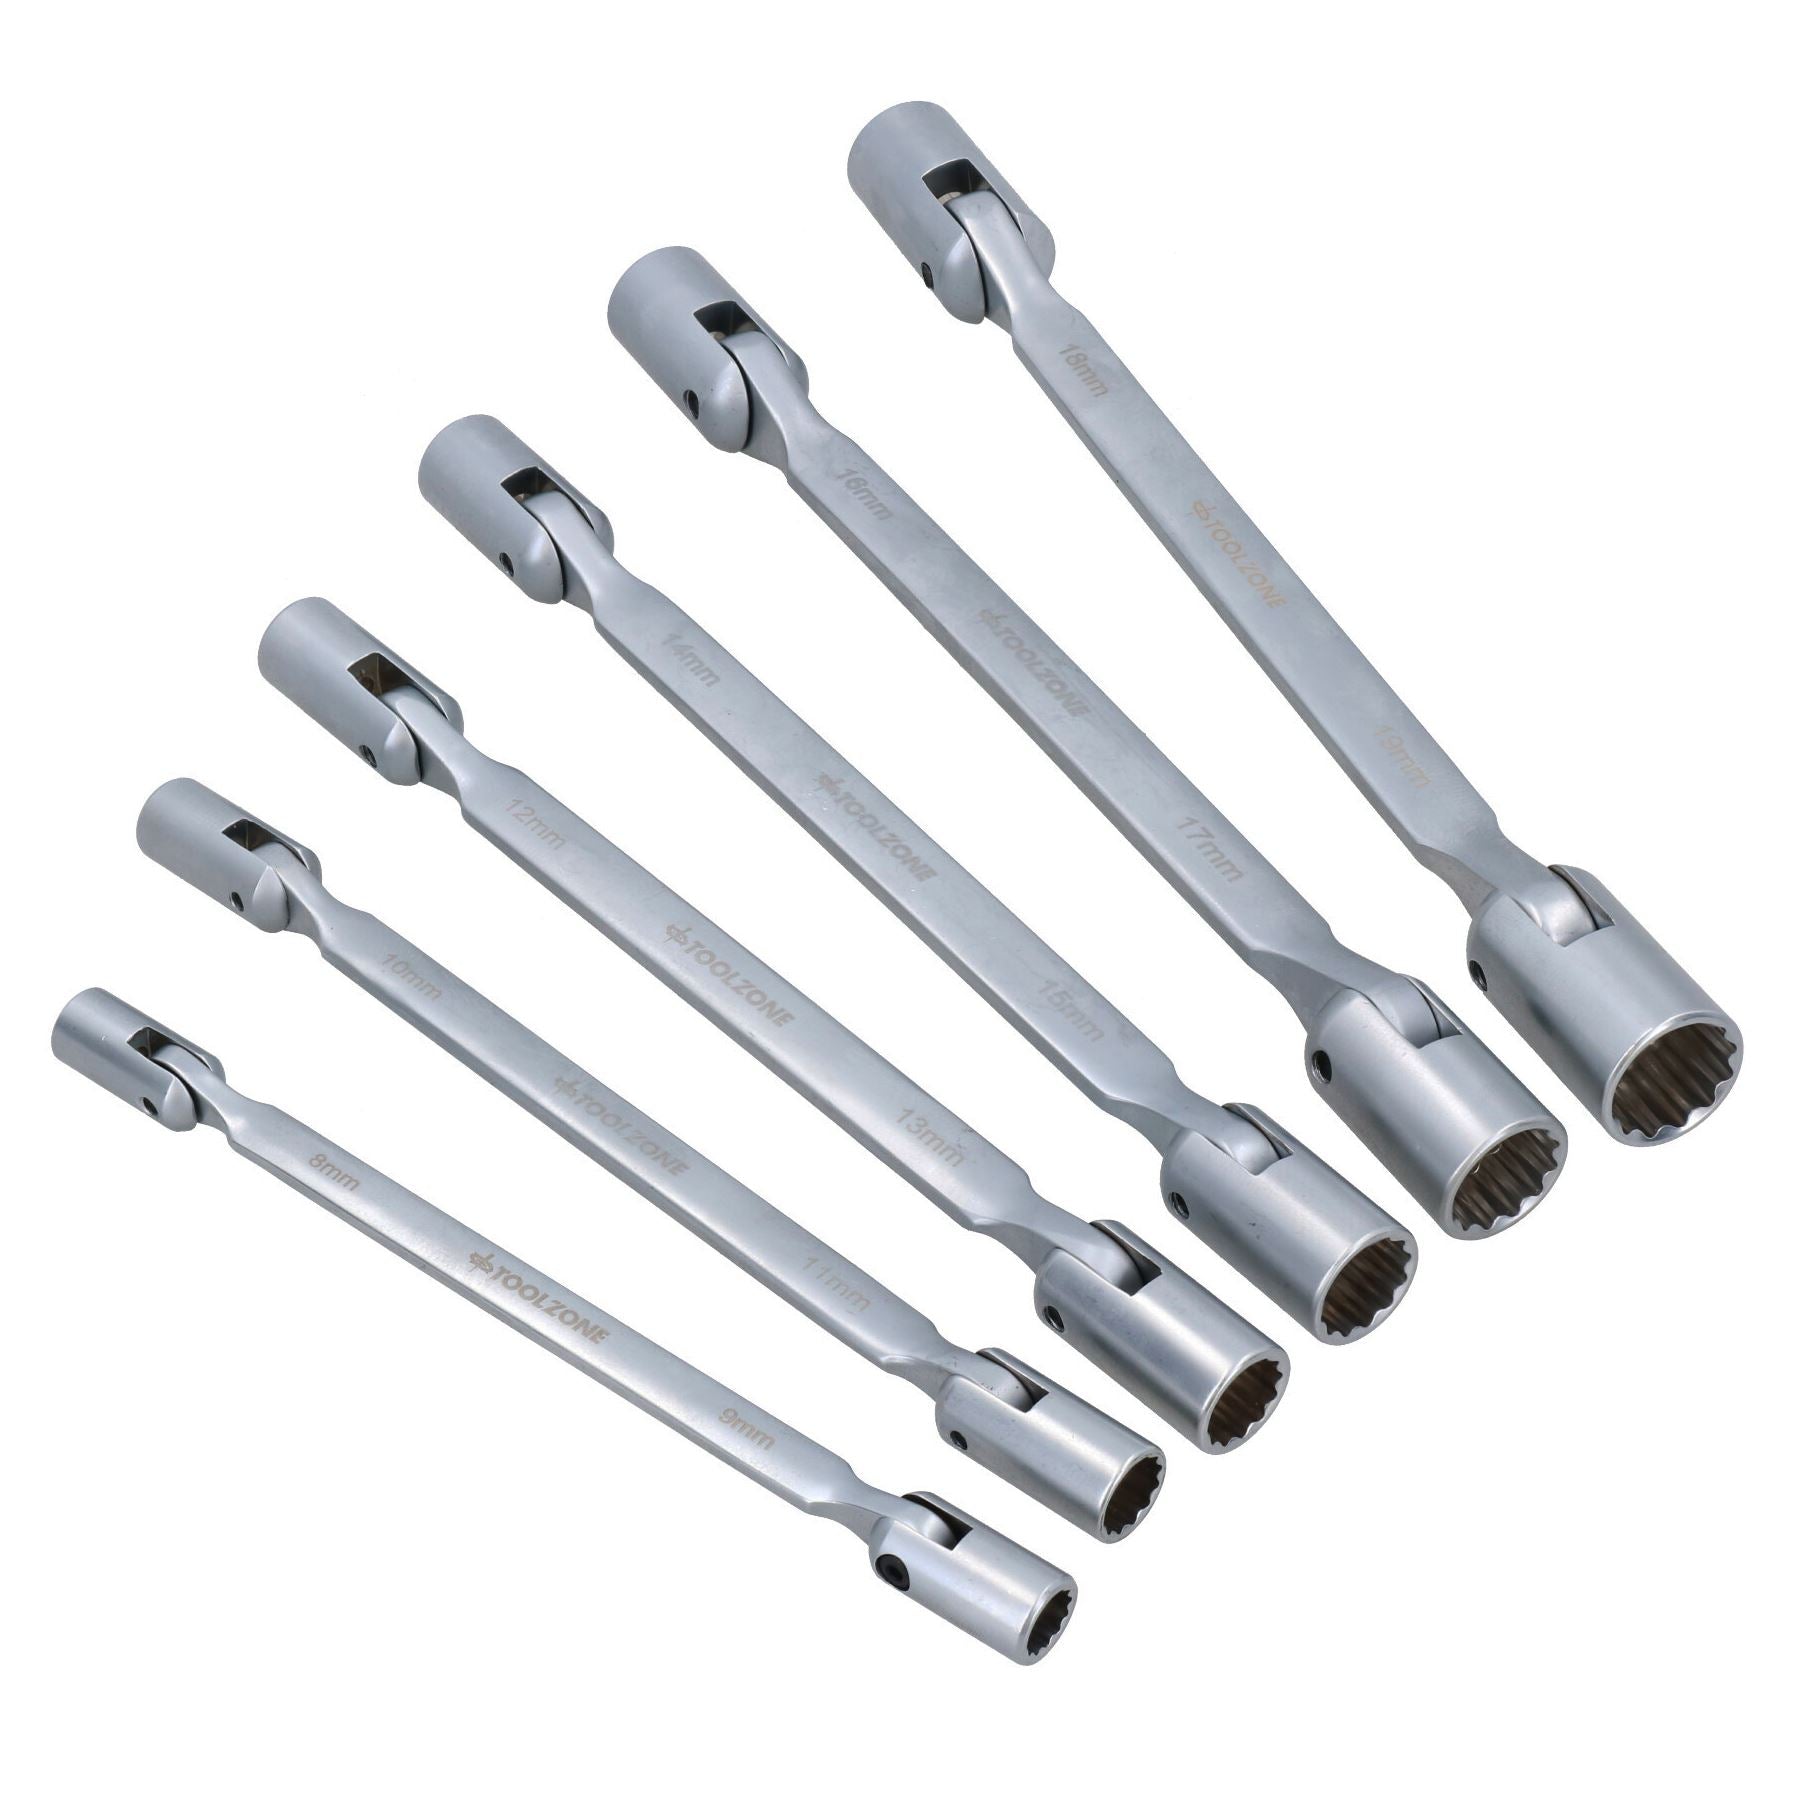 6pc Double End Flexible Socket Wrench Metric Spanner 8-19mm 12 Point TE844